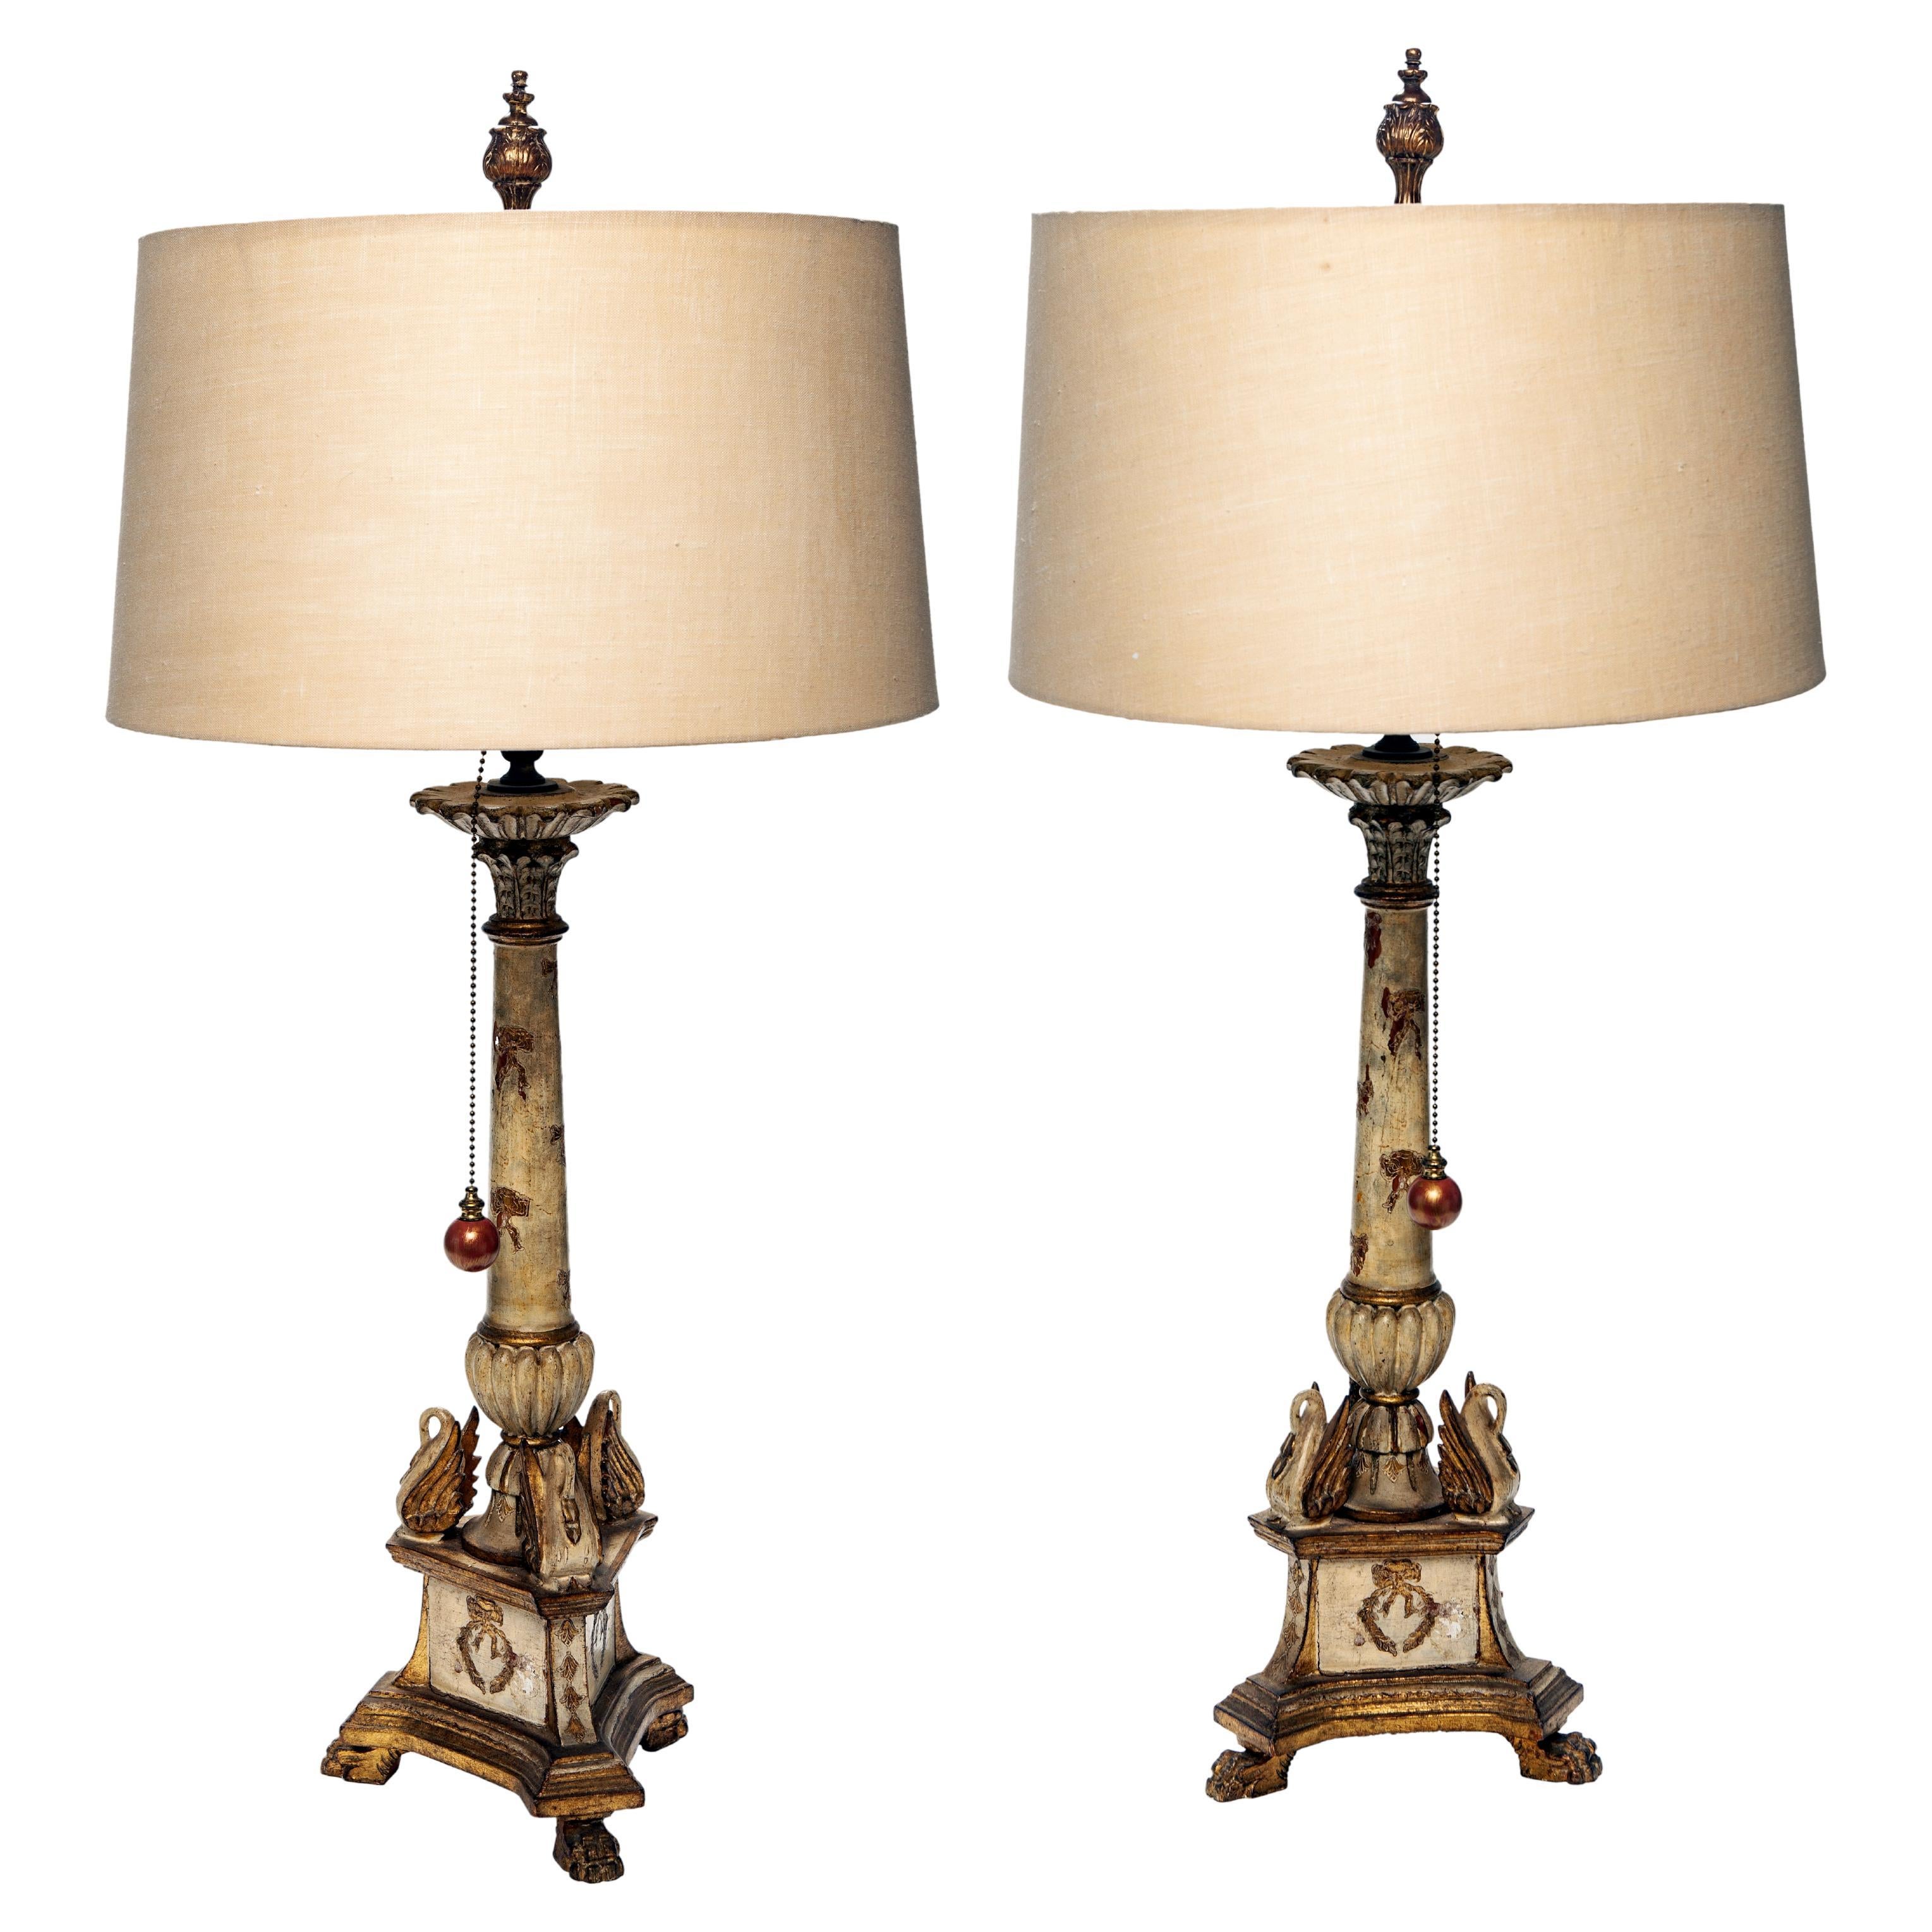 Charming pair of vintage Italian Florentine candlestick lamps with carved wood bases with original painted and gilded finish.
Long beaded brass chain with very user friendly & stylish large bead pulls.
Aged brass casings with new wiring using the